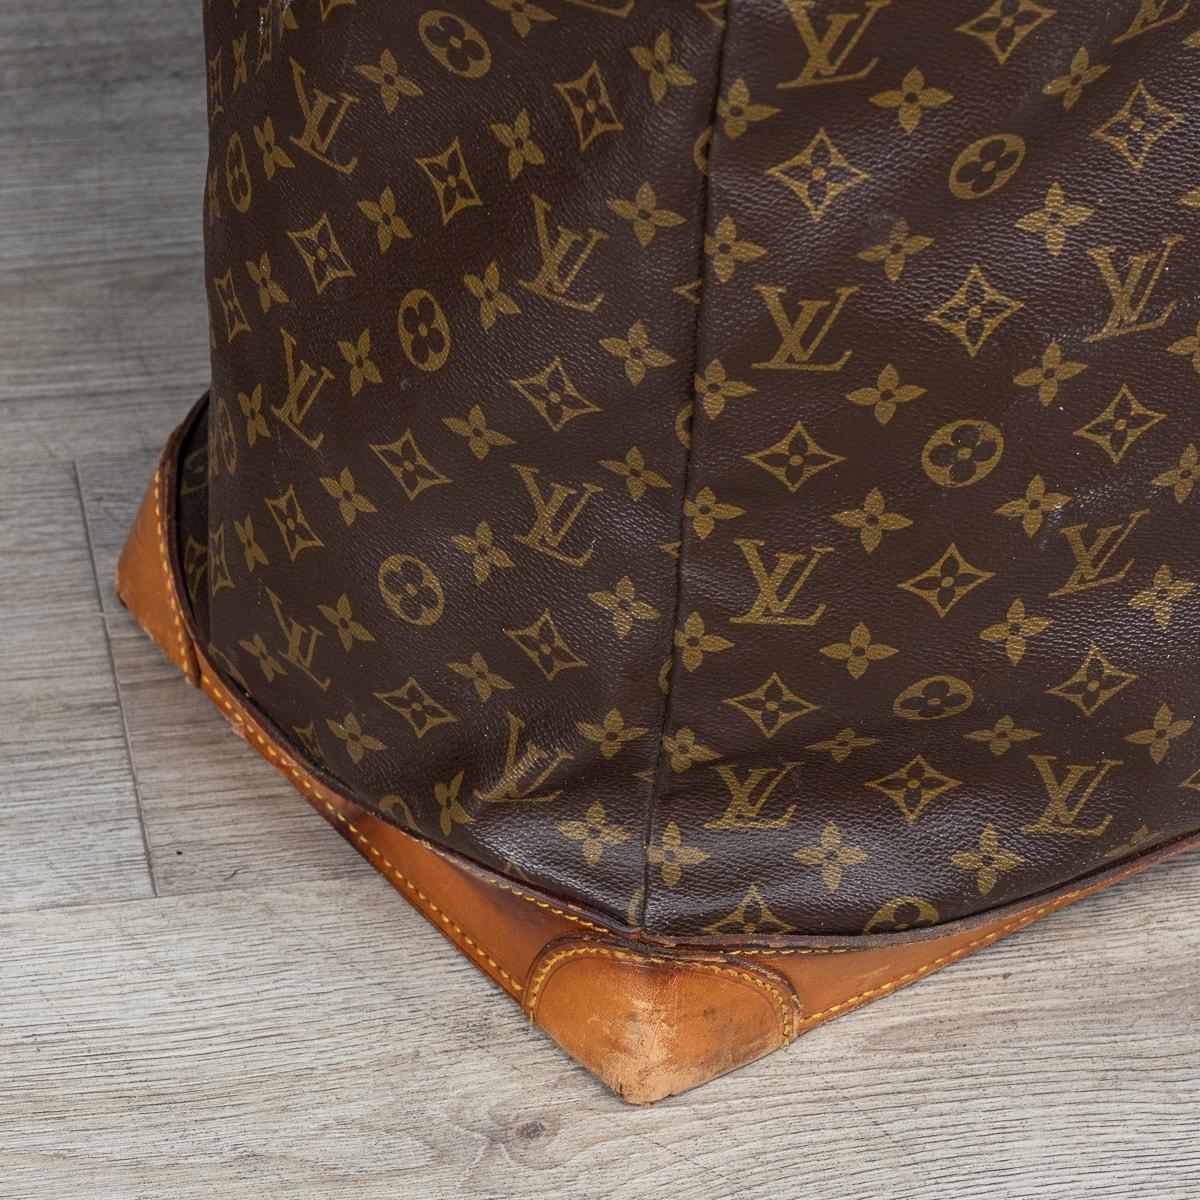 20th Century Louis Vuitton Steamer Bag In Monogram Canvas, Made In France For Sale 10